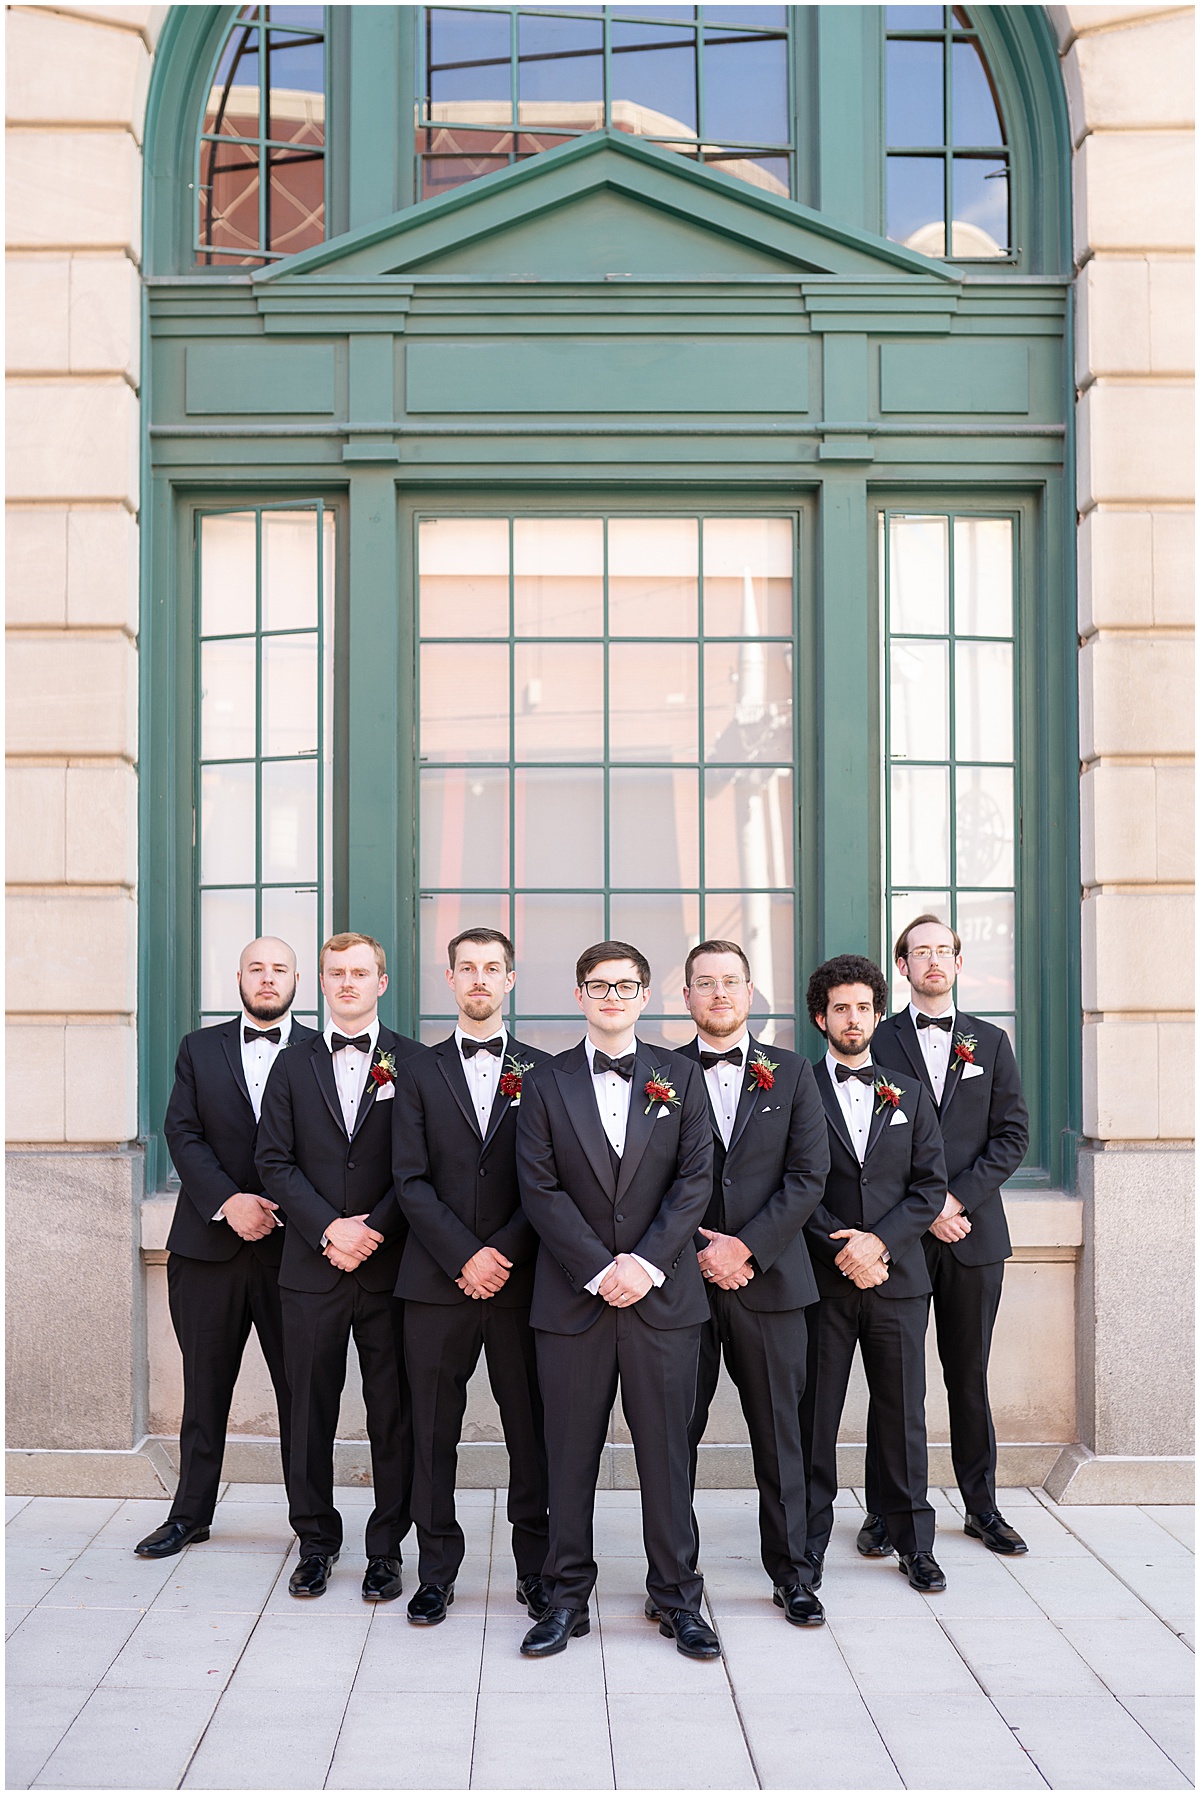 Groomsmen photos in black tuxes in downtown Indianapolis